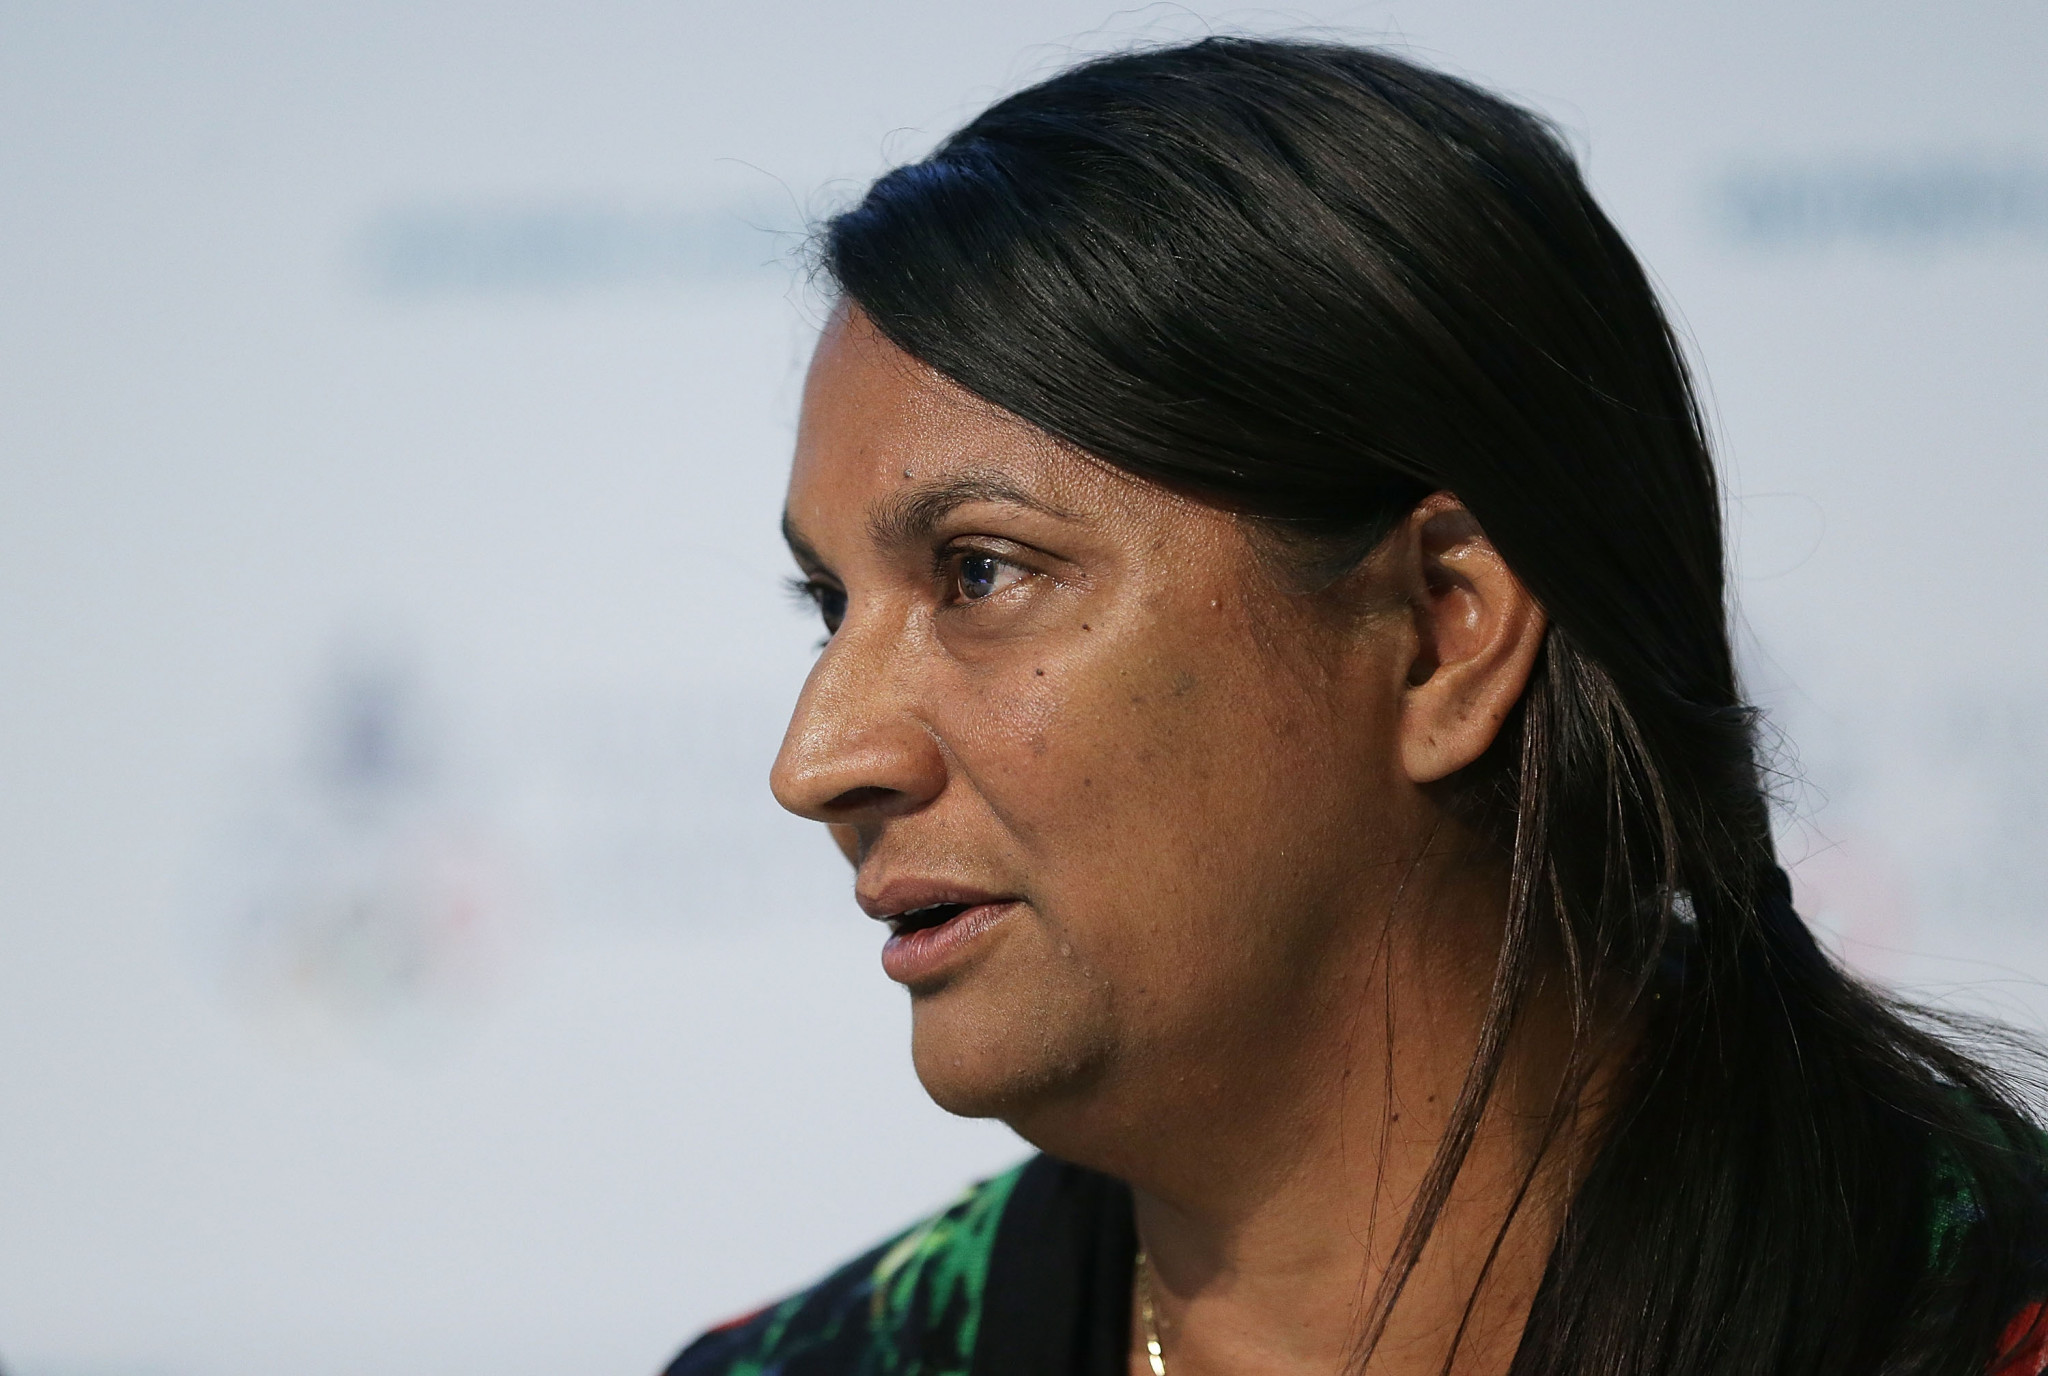  Nova Peris defends daughter Jessica over "trial-by-media" following positive drugs test